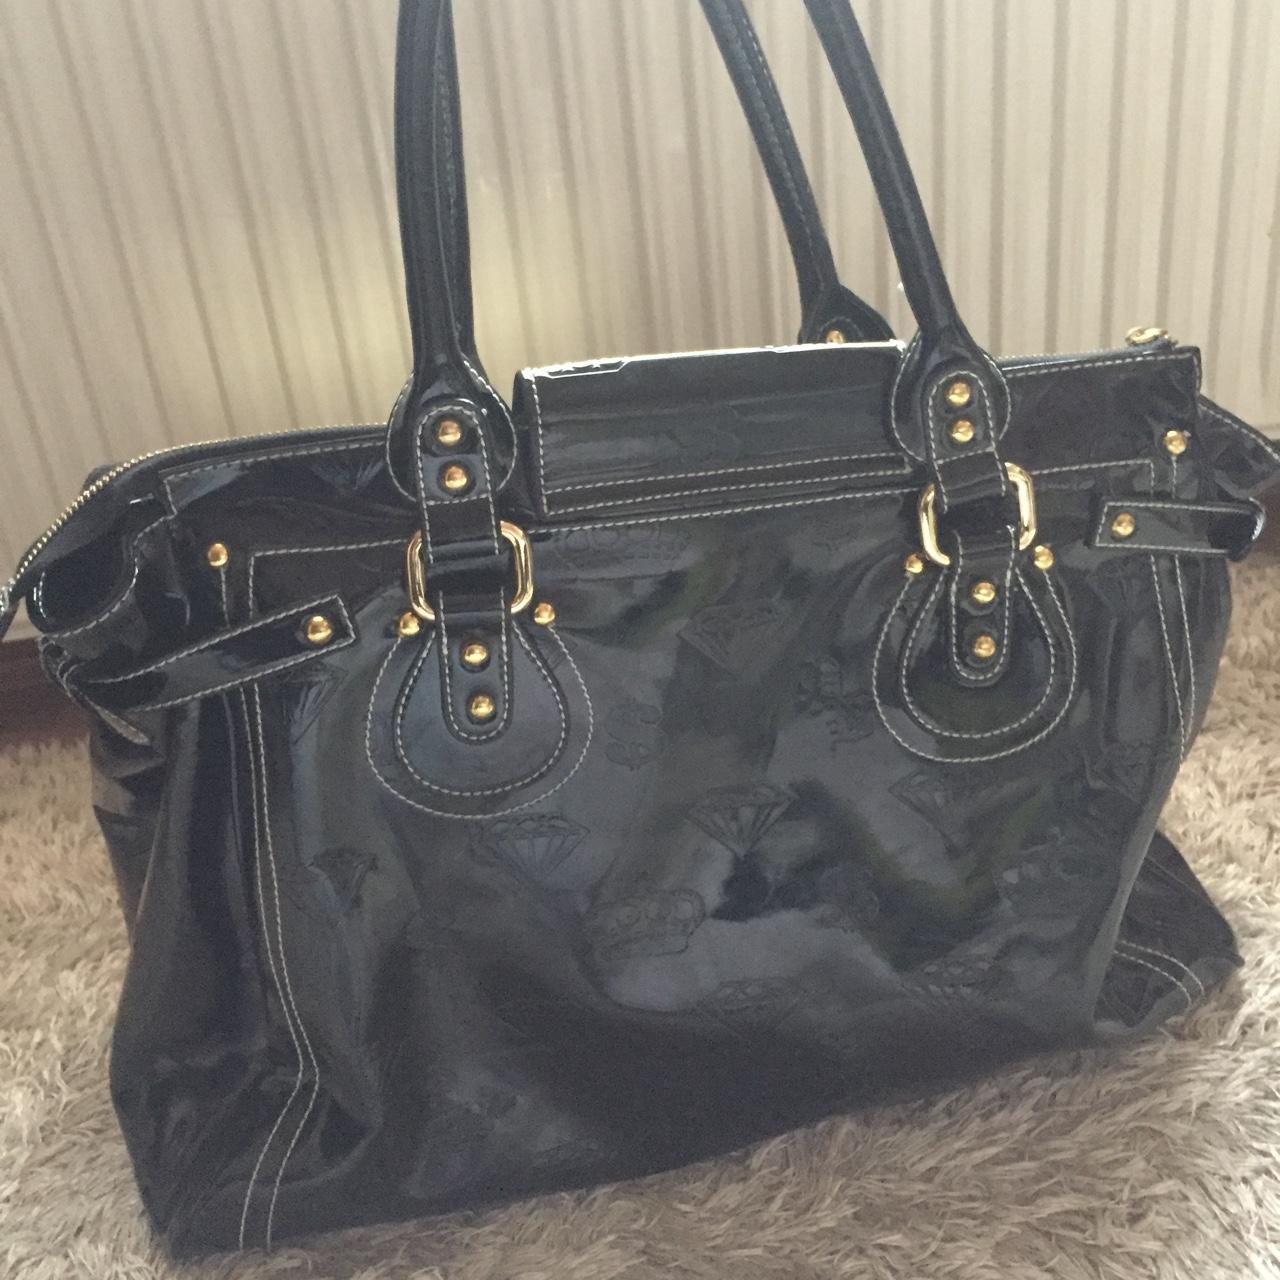 Leather handbag PAULS BOUTIQUE Black in Leather - 27583986